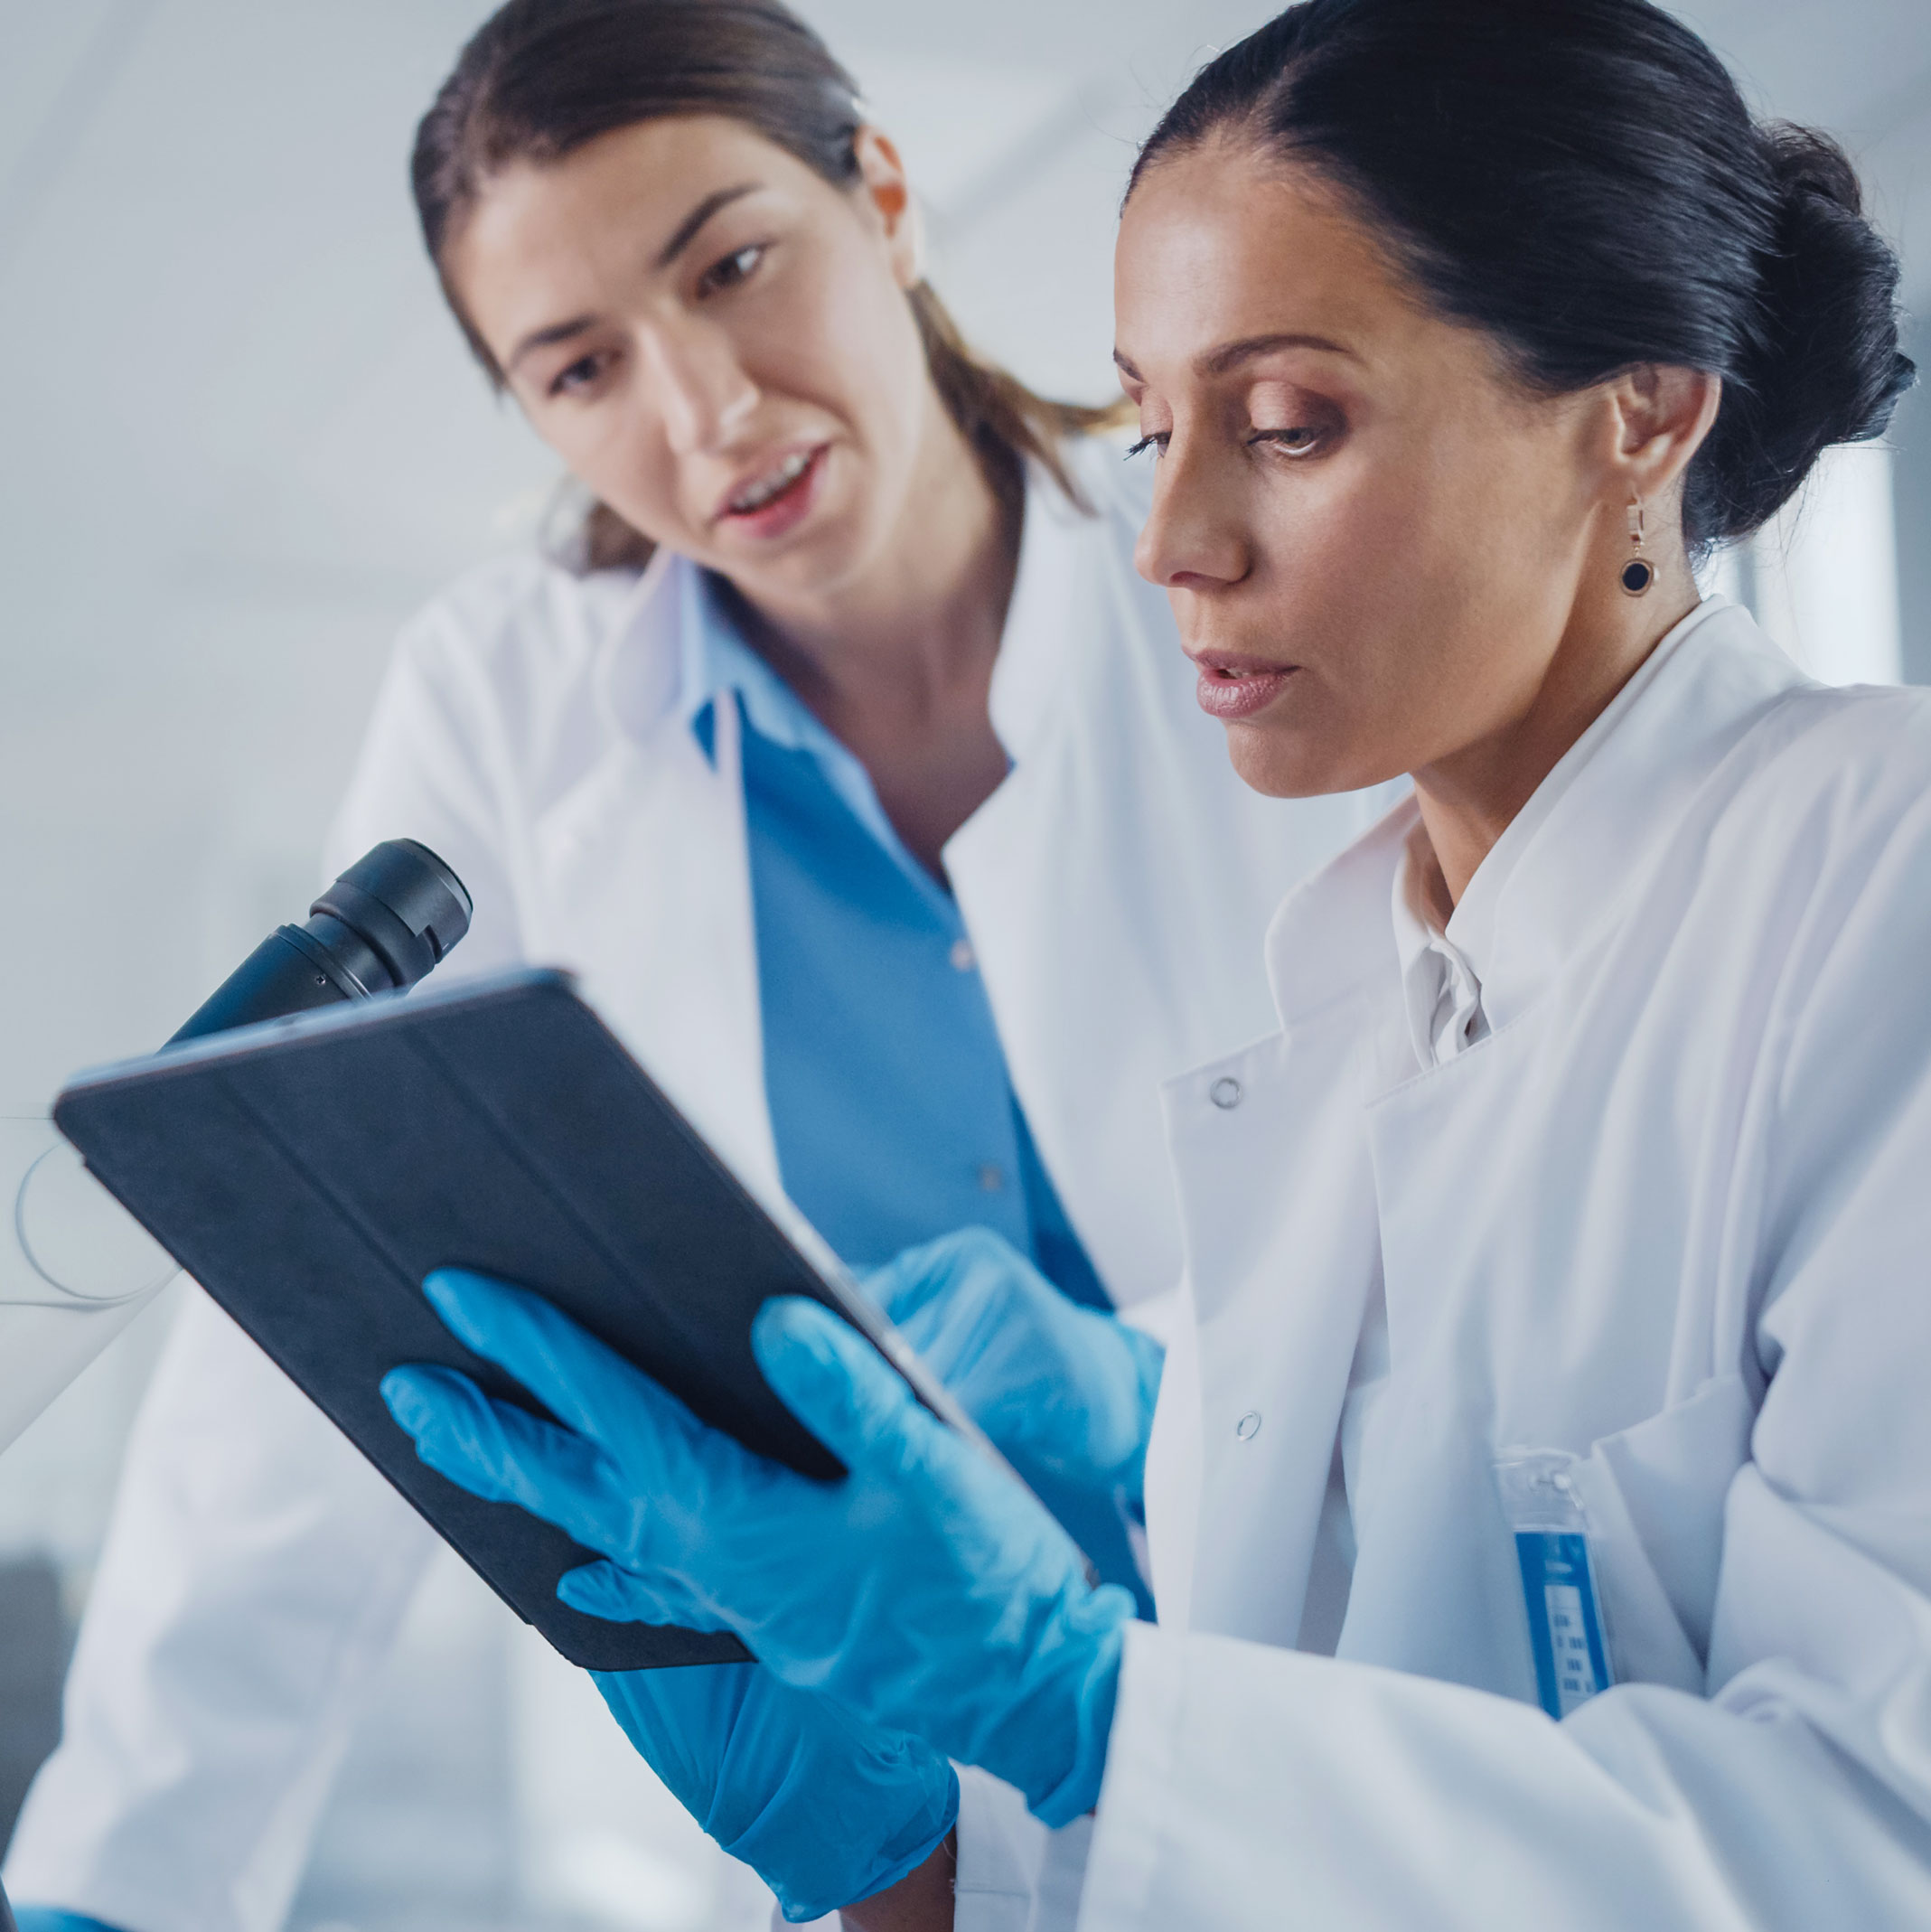 two women wearing white lab coats and blue gloves looking at a tablet